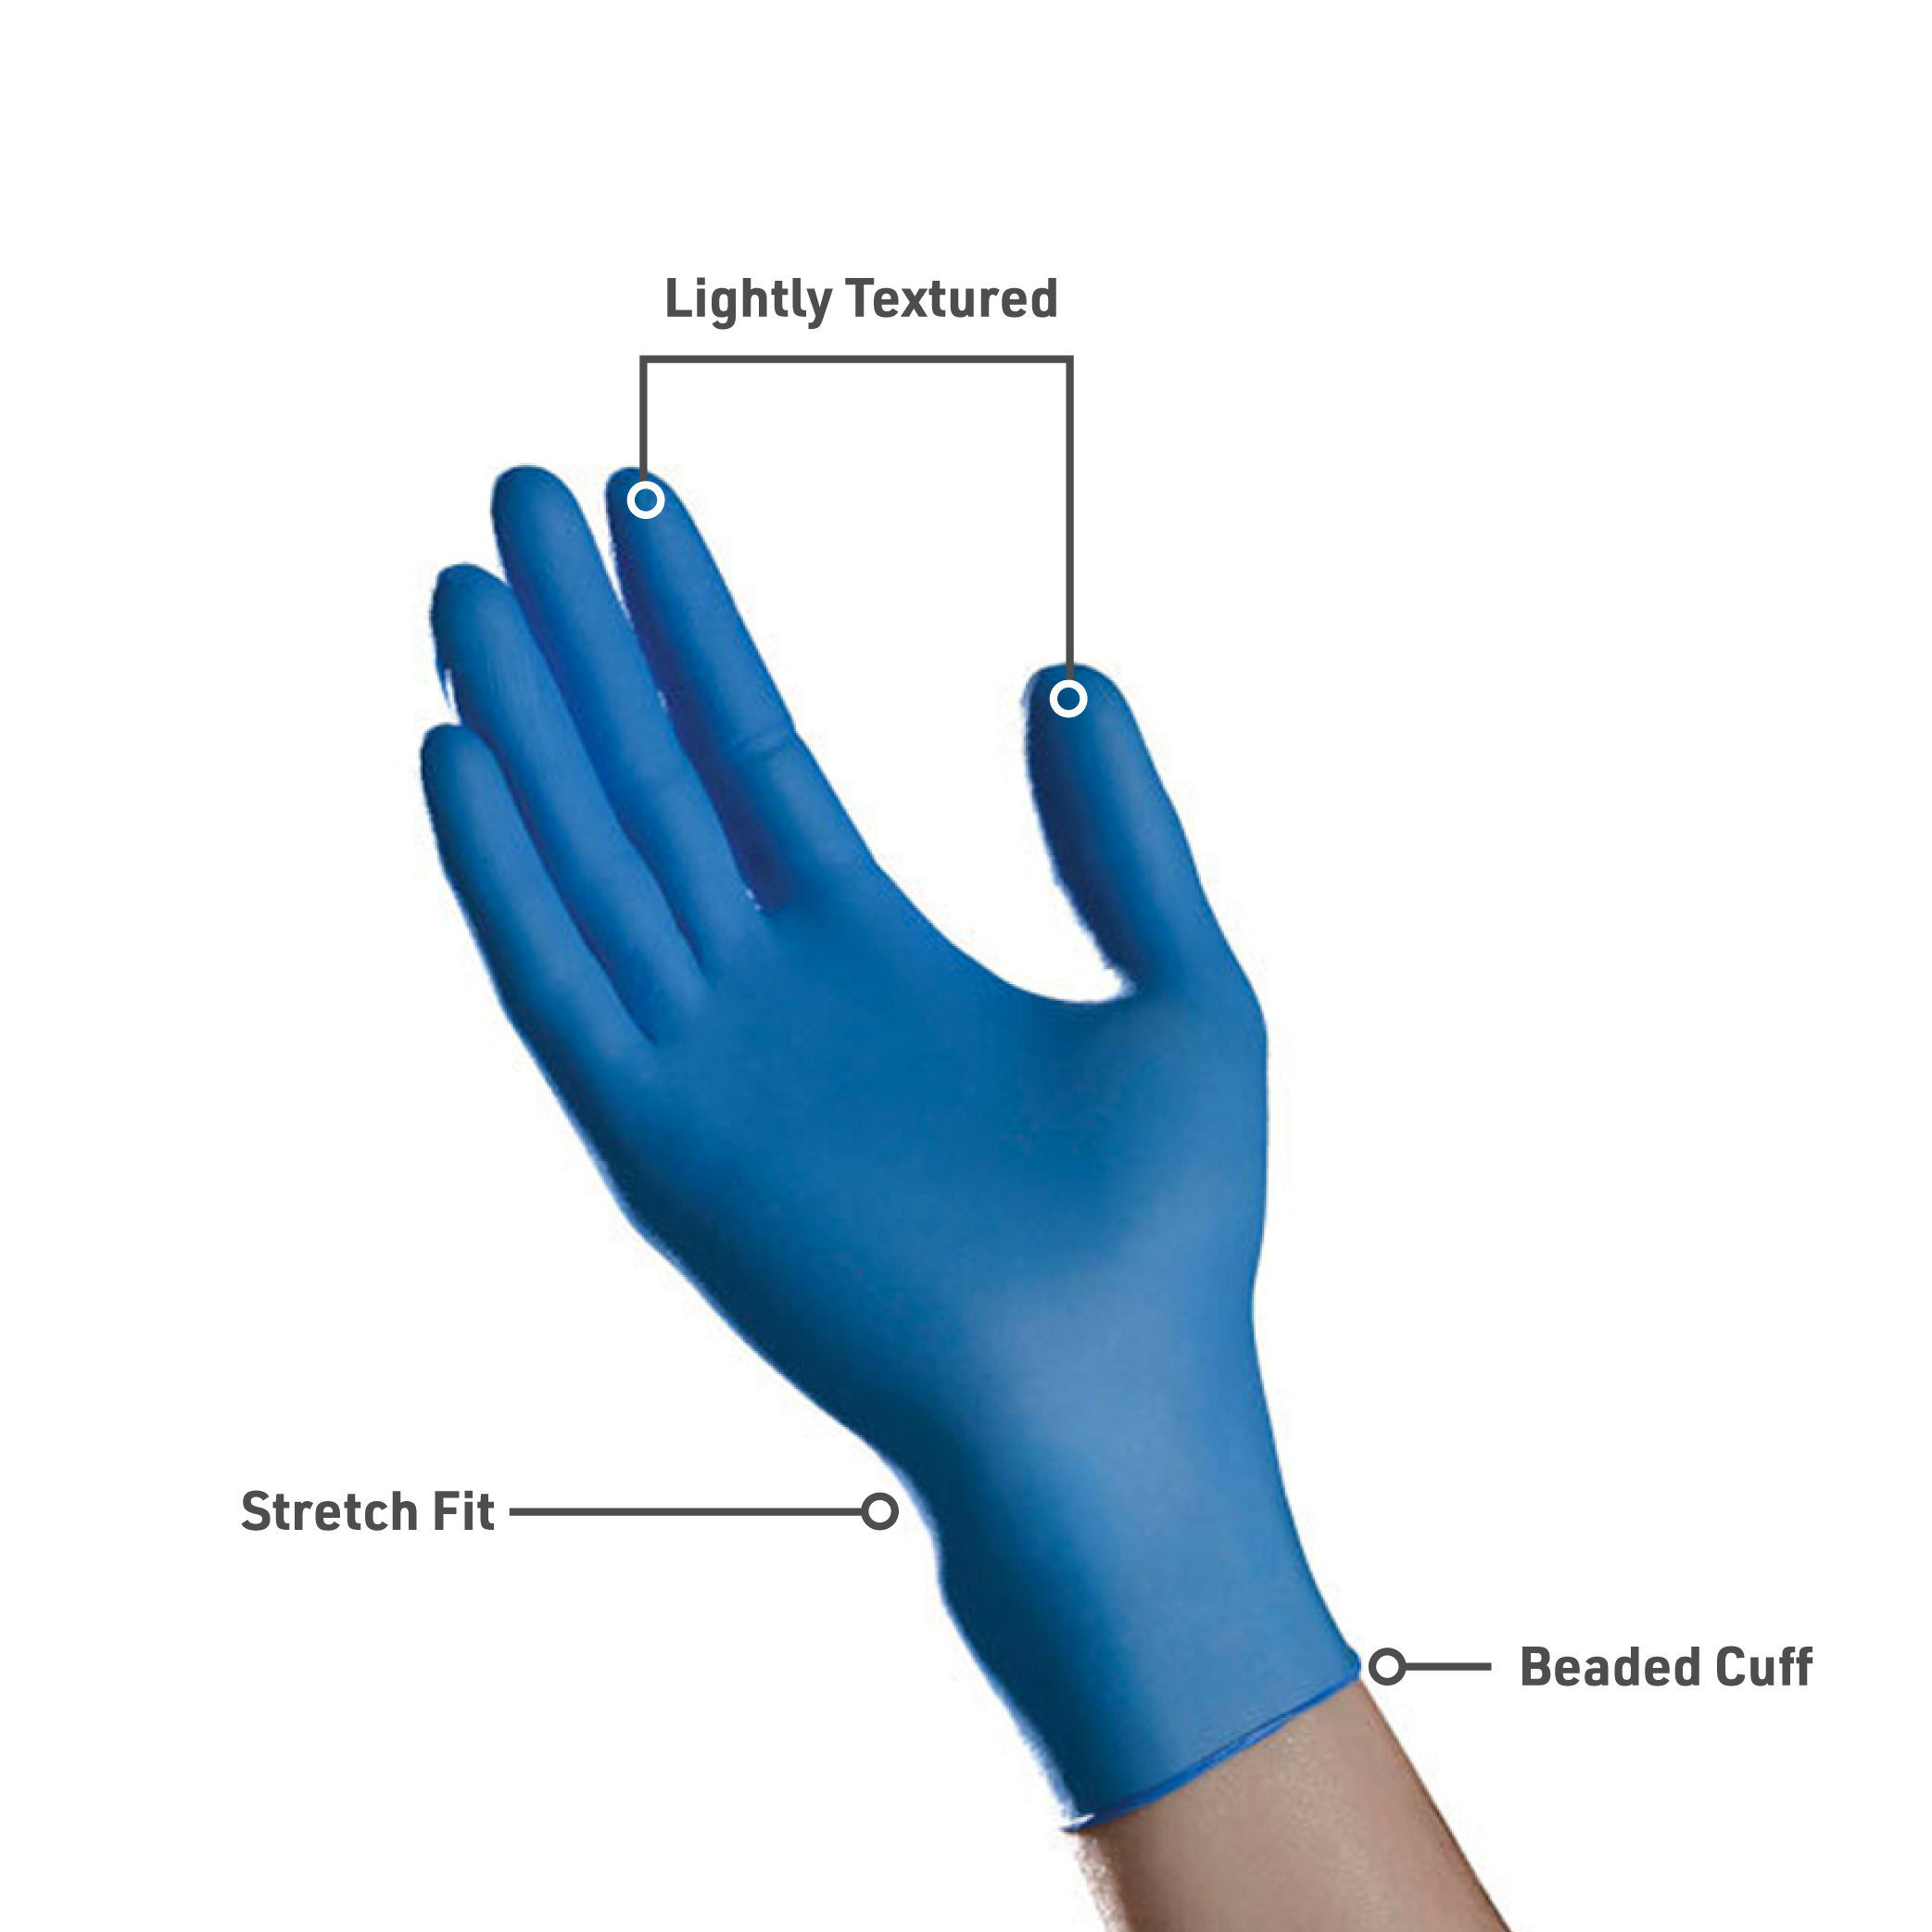 BDM Nitrile Gloves infographic for important features